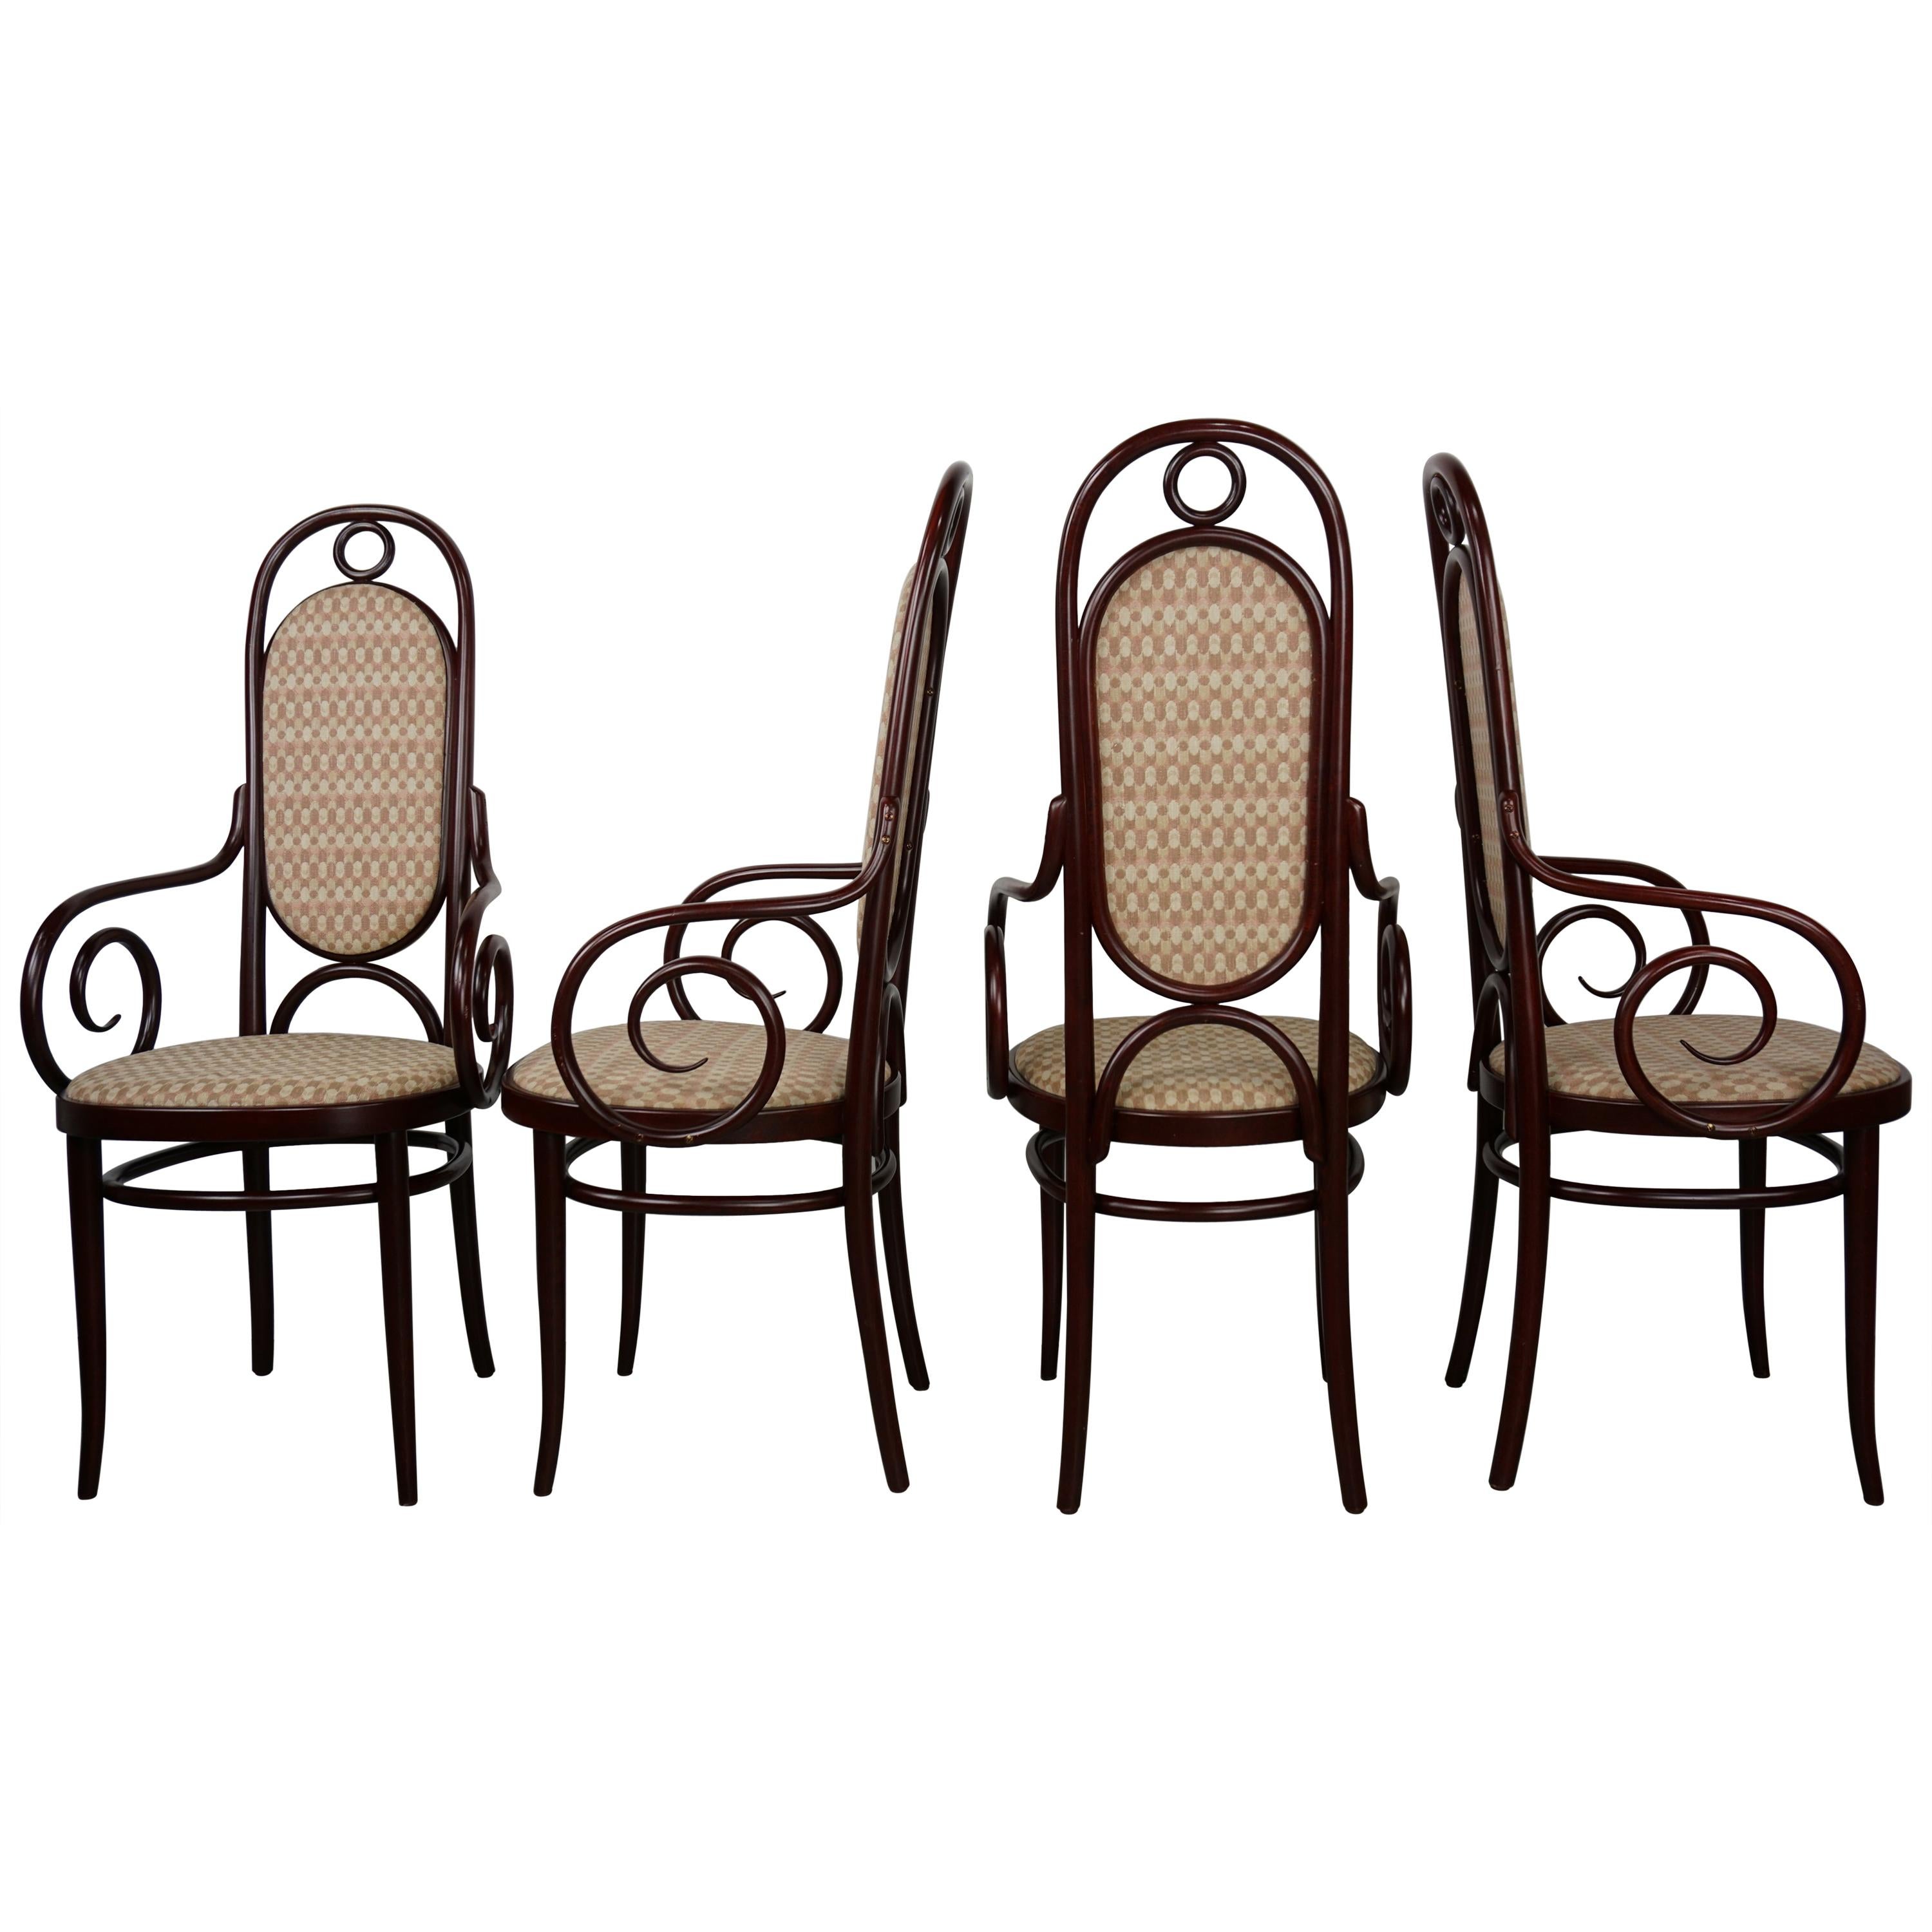 Set of 4 Thonet Bentwood Armchairs N°17